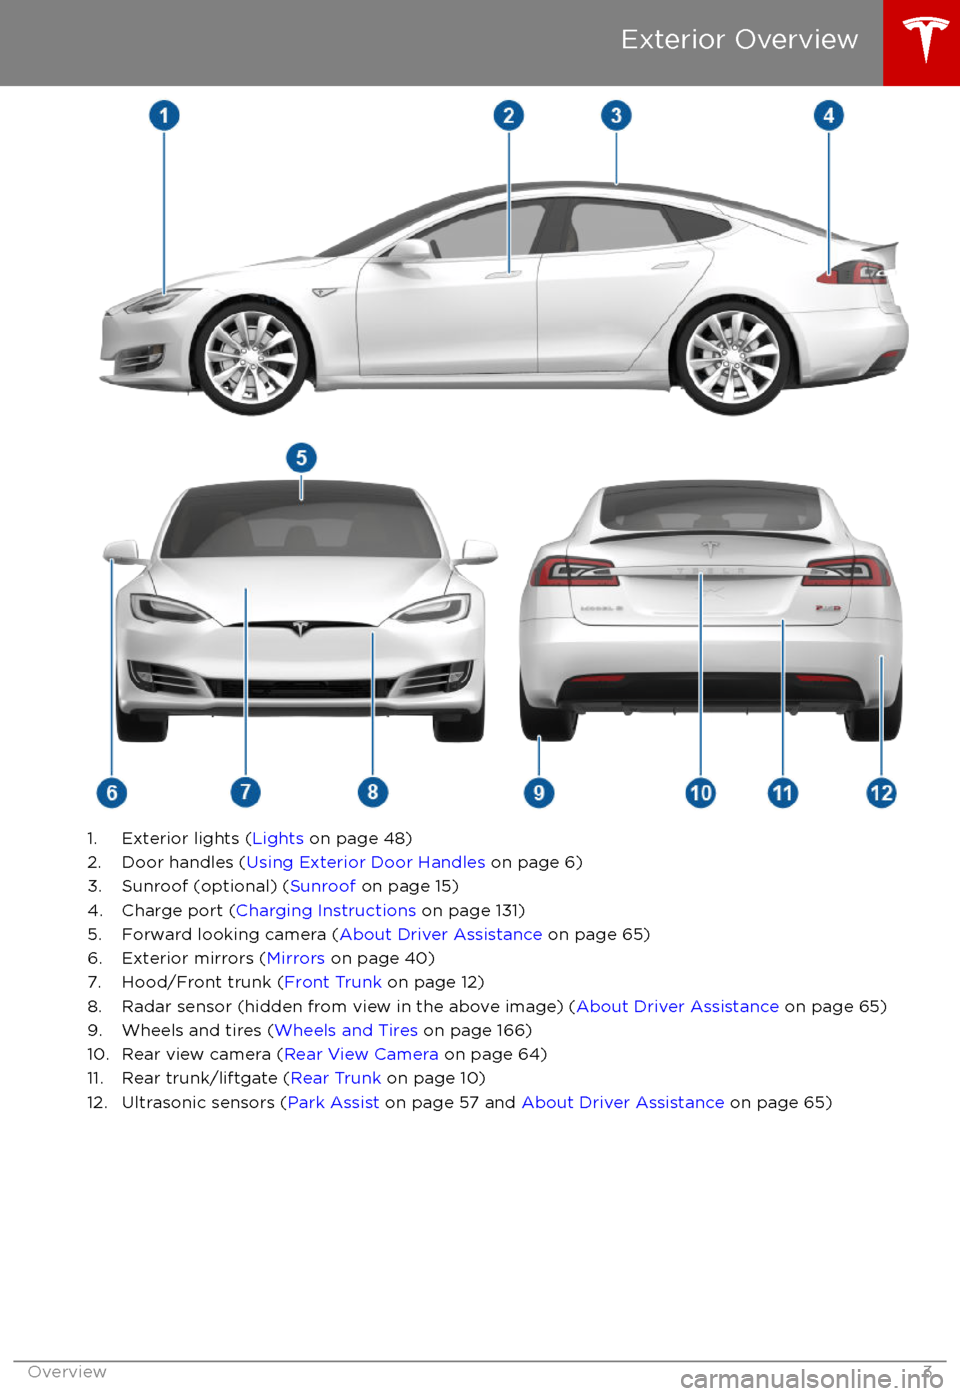 TESLA MODEL S 2017  Owners Manual 1. Exterior lights (Lights on page 48)
2. Door handles ( Using Exterior Door Handles  on page 6)
3. Sunroof (optional) ( Sunroof on page 15)
4. Charge port ( Charging Instructions  on page 131)
5. For